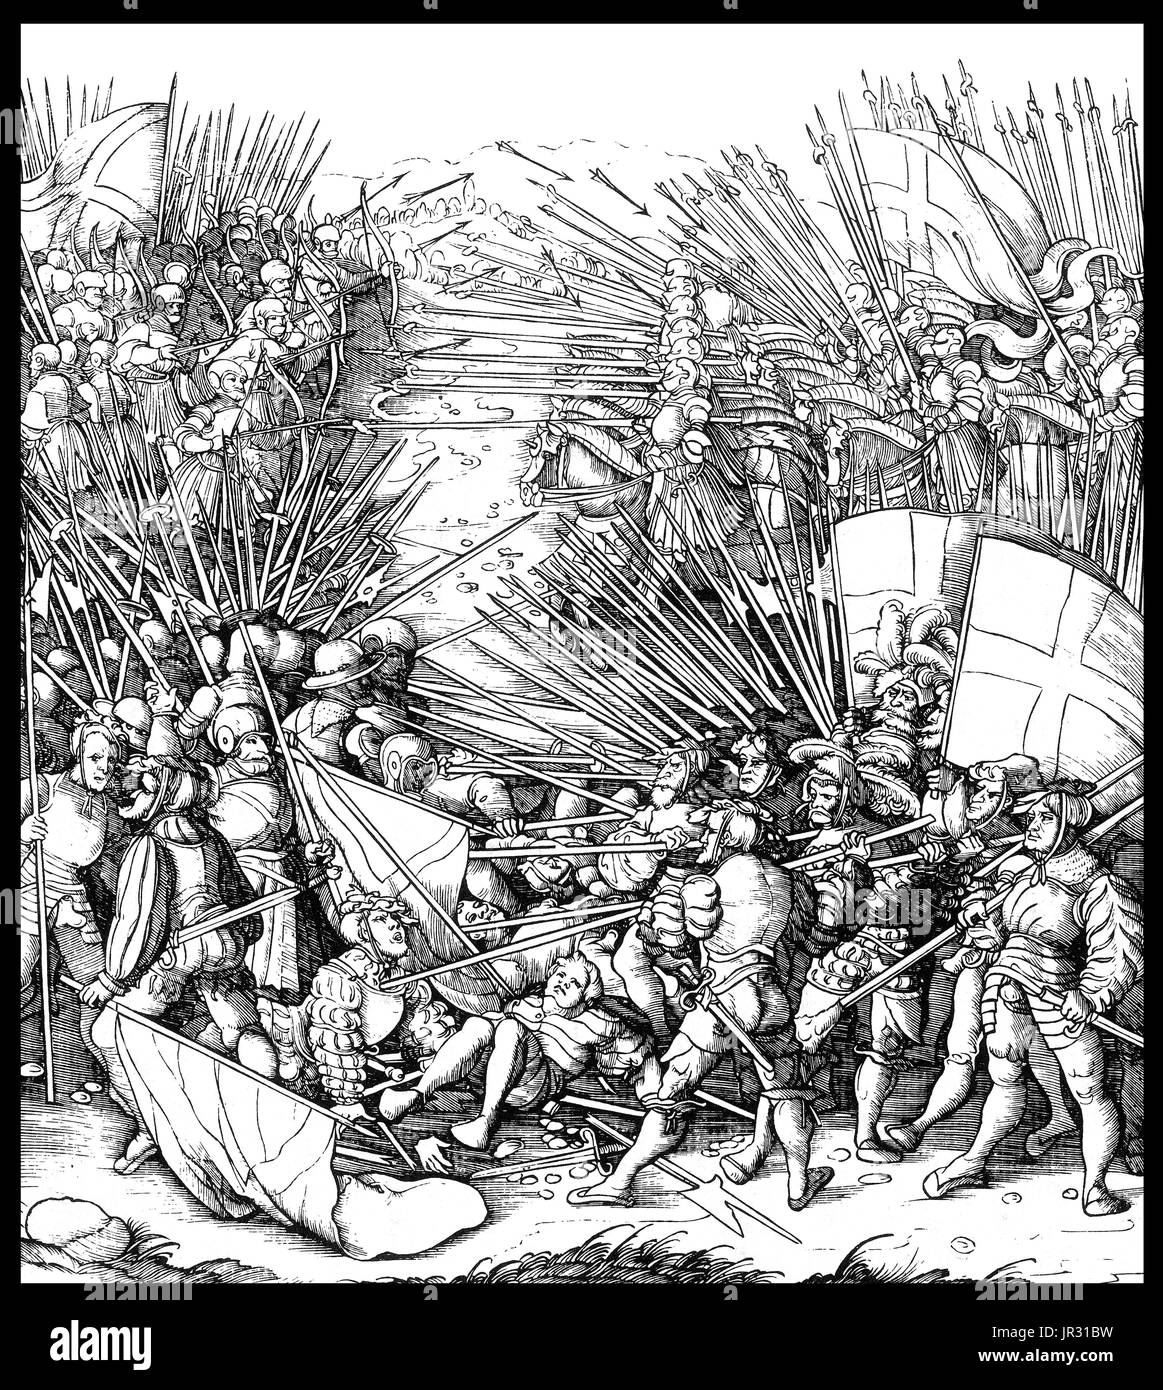 One of many battle scenes in Der Weisskunig or The White King a chivalric novel and biography of the Holy Roman Emperor, Maximilian I, (1486-1519) written in German by Maximilian and his secretary between 1505-16. The story is based on the lives of Maximilian, fictionalized as the 'young' White King, and his father, the 'old' White King, Frederick III, and recounts their dealings with contemporary characters whose identities are disguised but easily decipherable. These include the Blue King (the King of France), the Green King (the King of Hungary) and the King of Fish (representing Venice). M Stock Photo